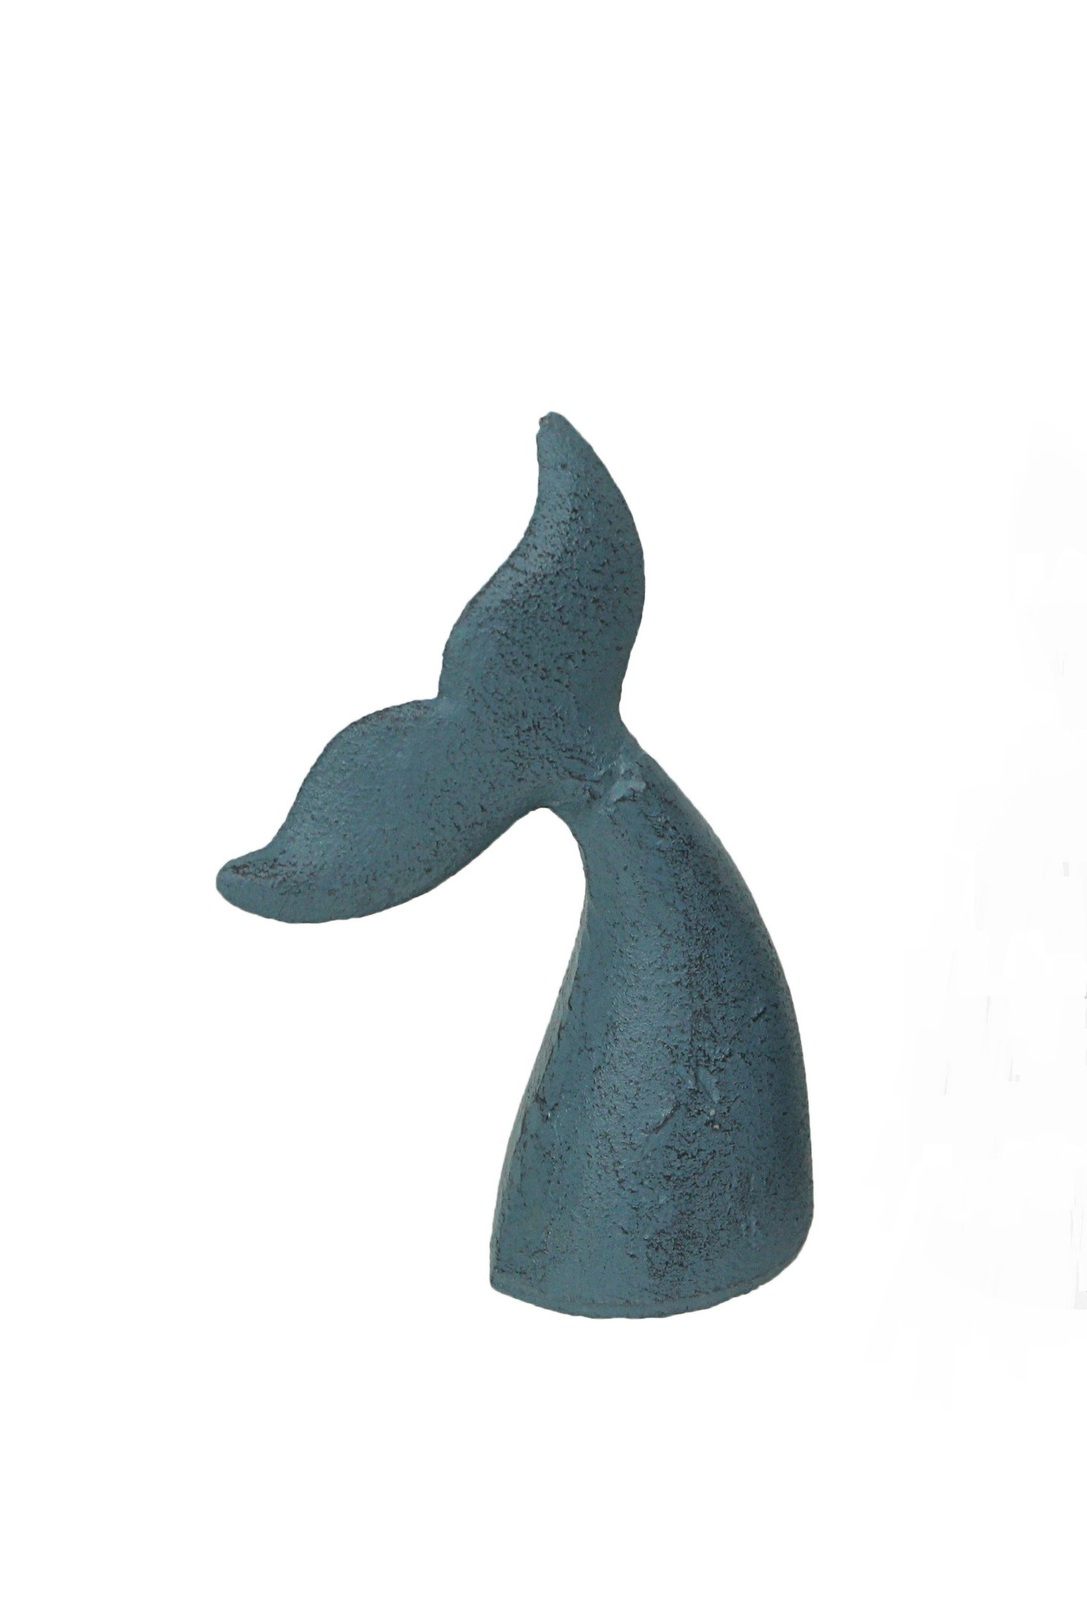 Primary image for Scratch & Dent Blue Cast Iron Whale Tail Bookend Bookshelf Sculpture